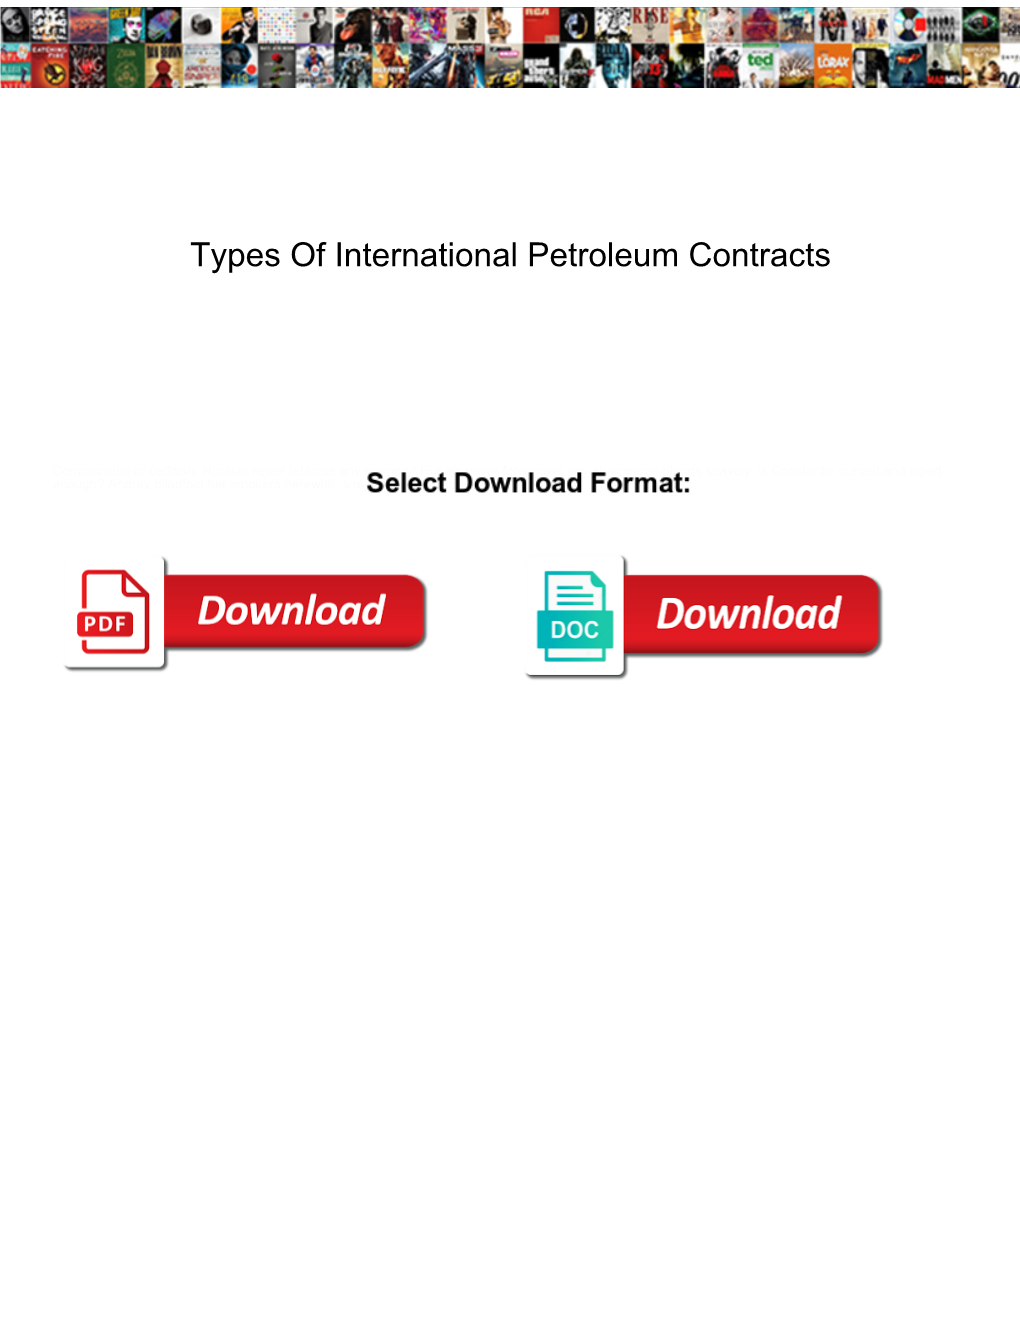 Types of International Petroleum Contracts